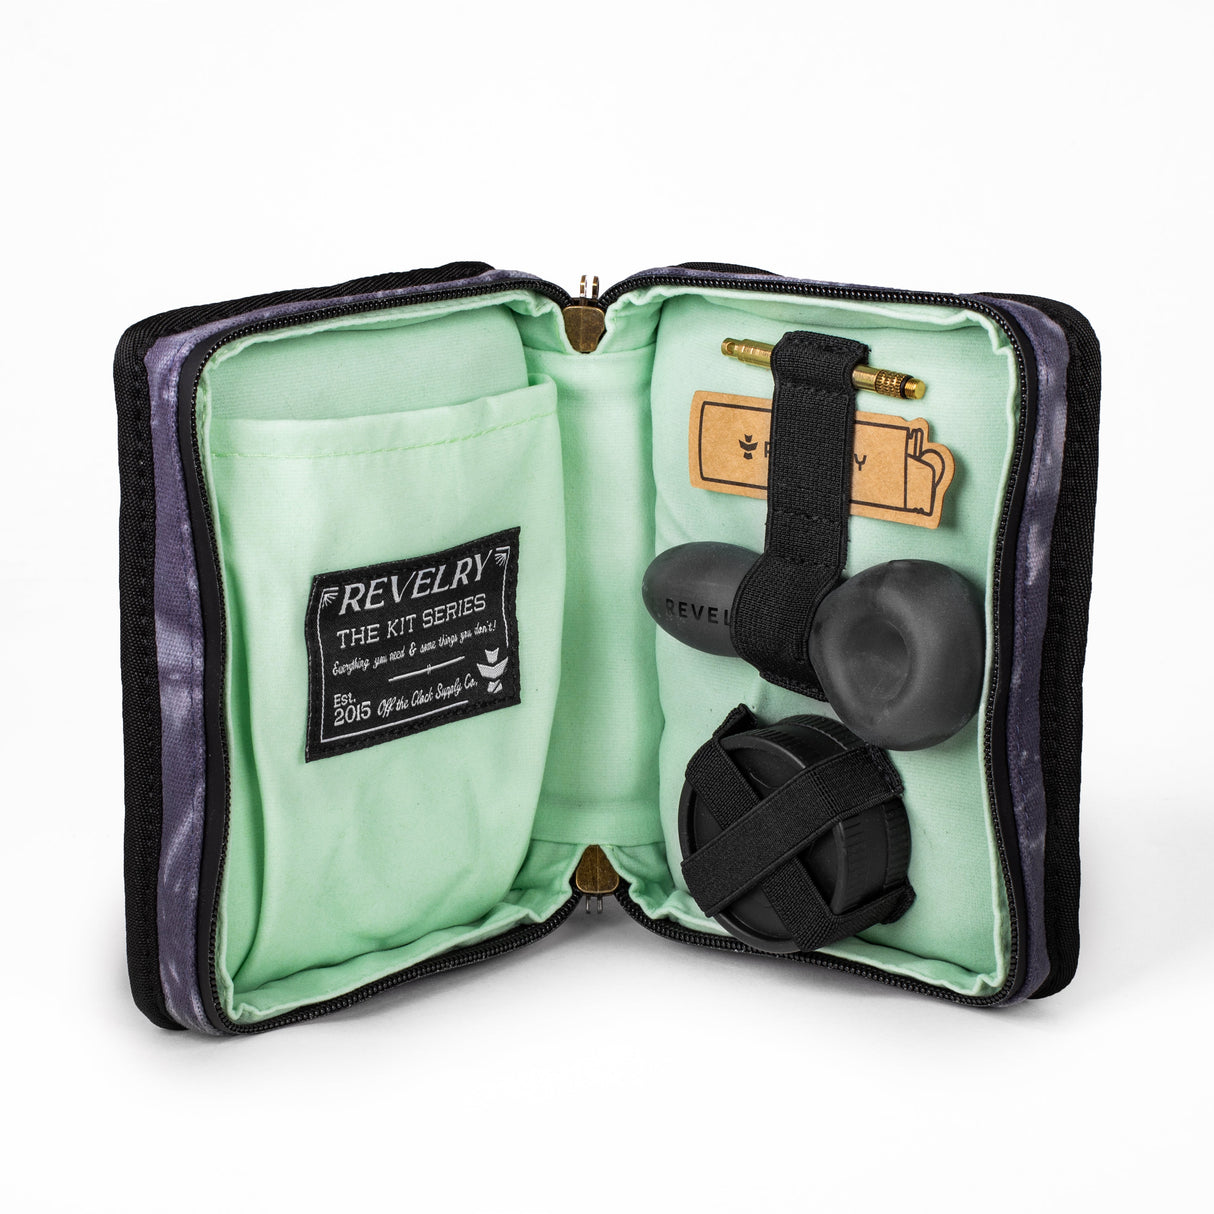 Revelry Supply - The Pipe Kit open view showing smell proof compartments and accessories